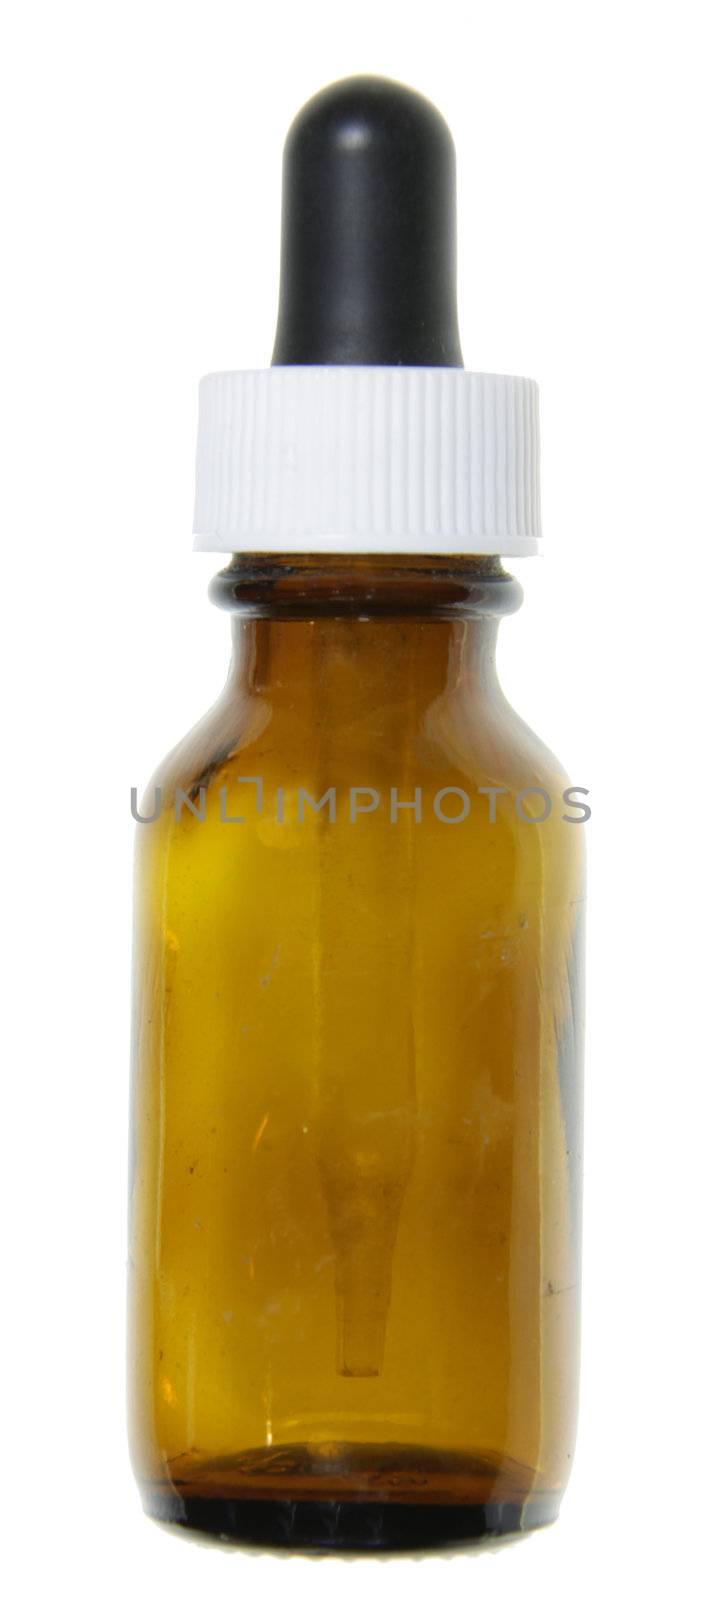 One Naturopathic Dropper Bottle
 by ca2hill